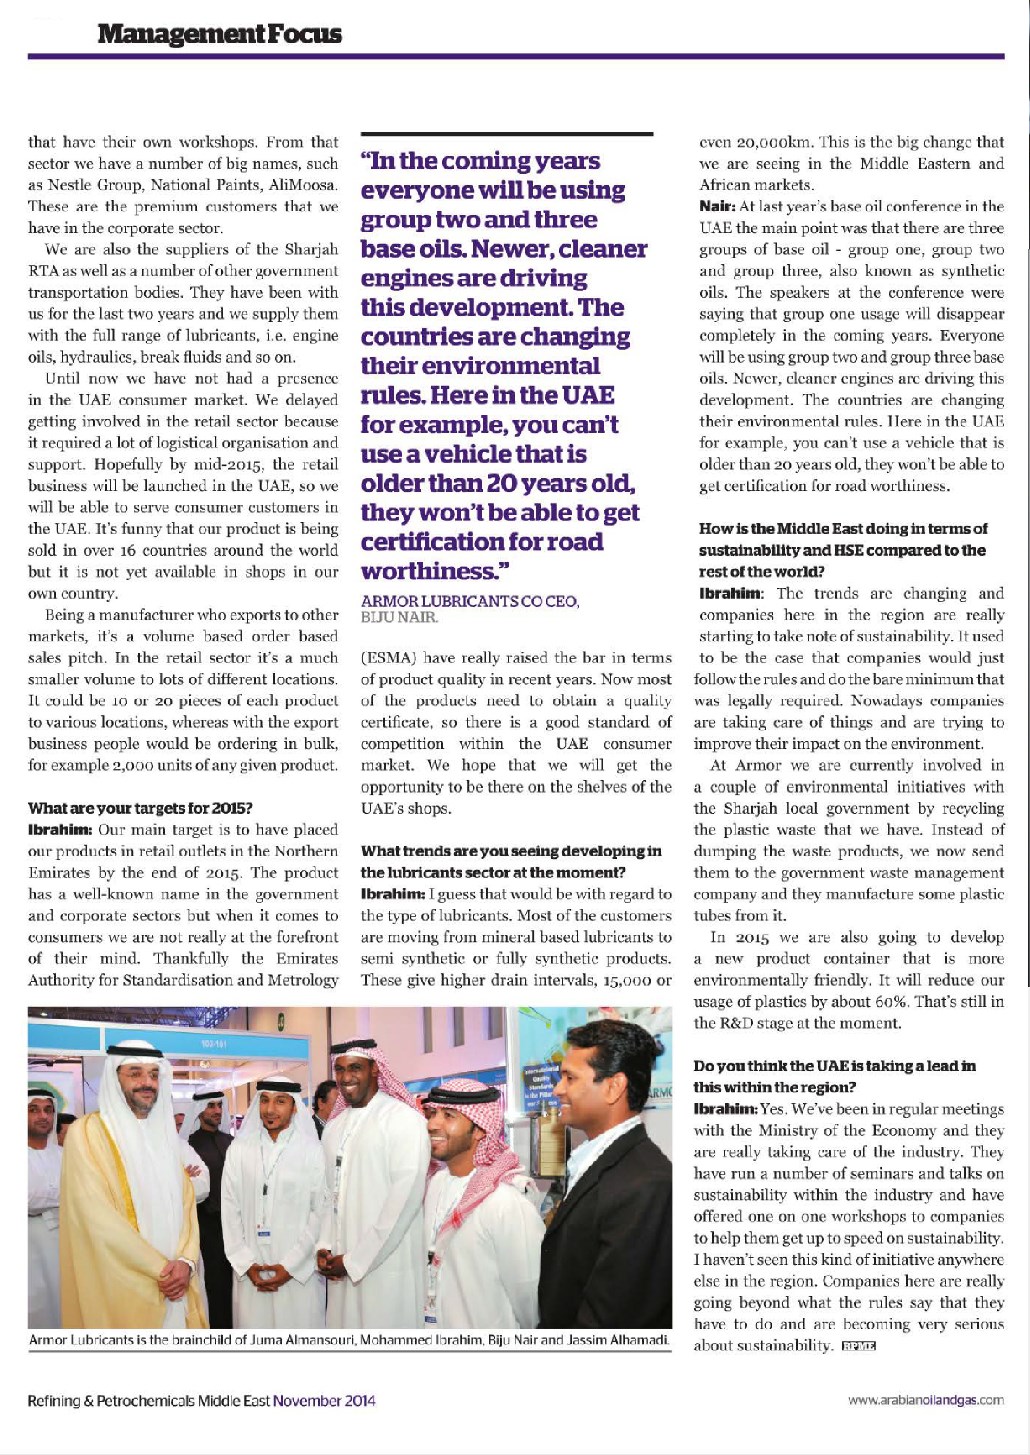 Armor Lubricants CEO message in News Magazine Smooth Operator Image